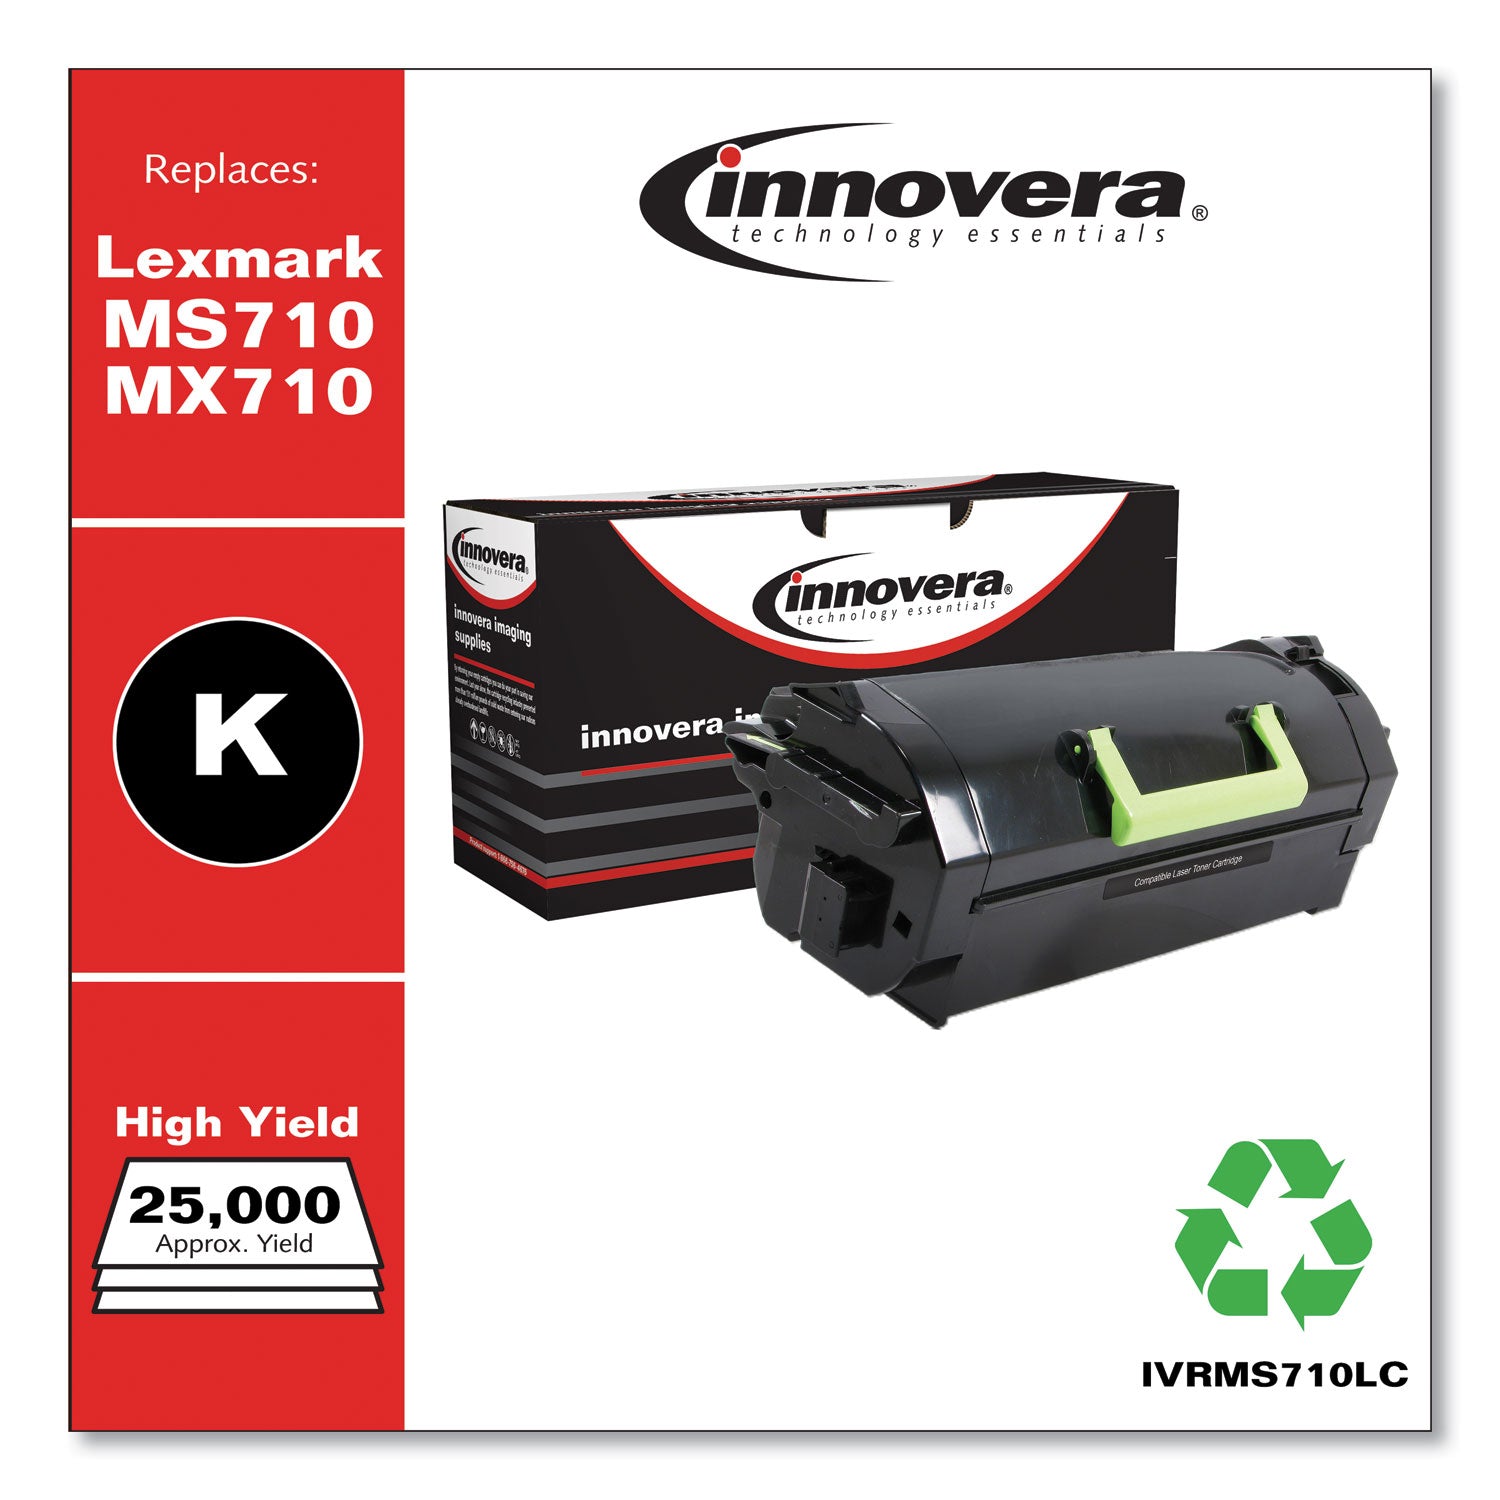 remanufactured-black-high-yield-toner-replacement-for-ms710-mx710-25000-page-yield_ivrms710lc - 2